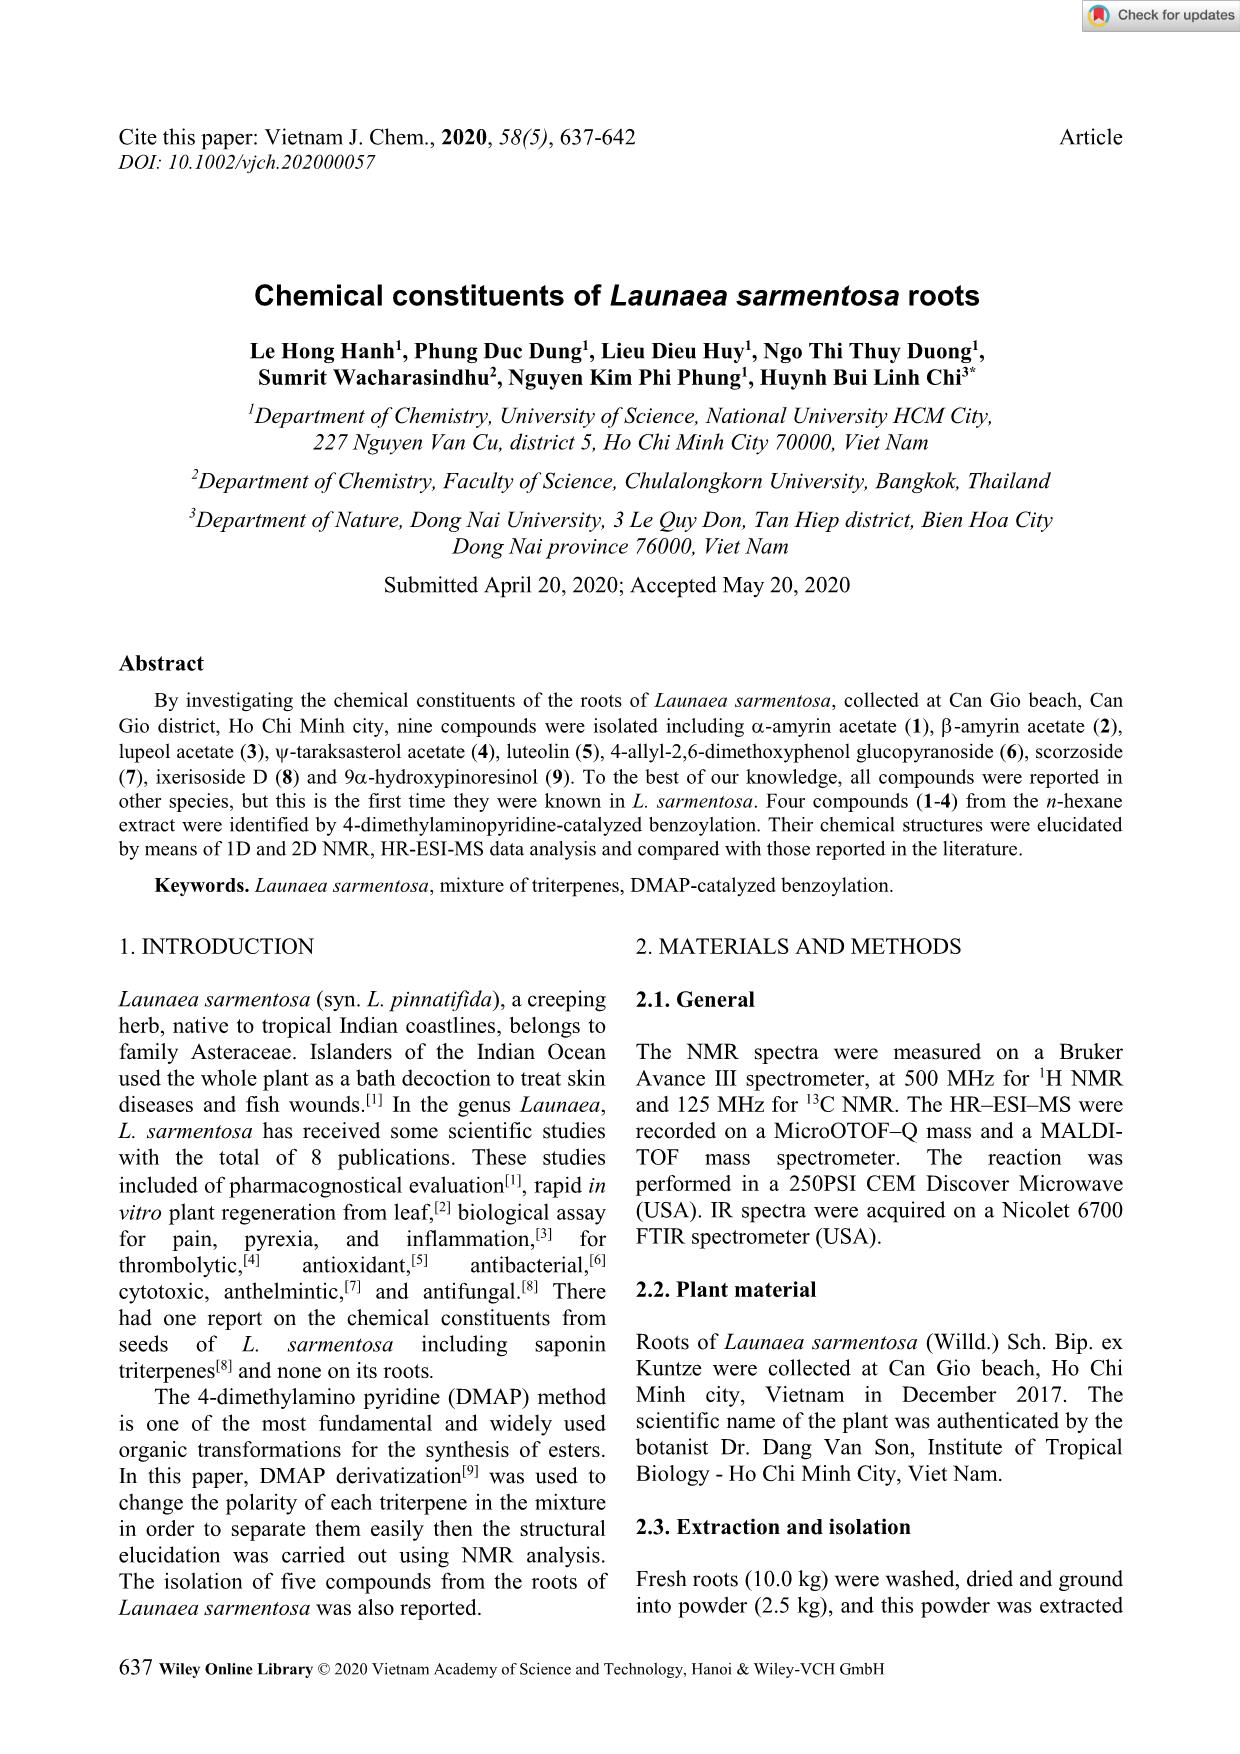 Chemical constituents of Launaea sarmentosa roots trang 1